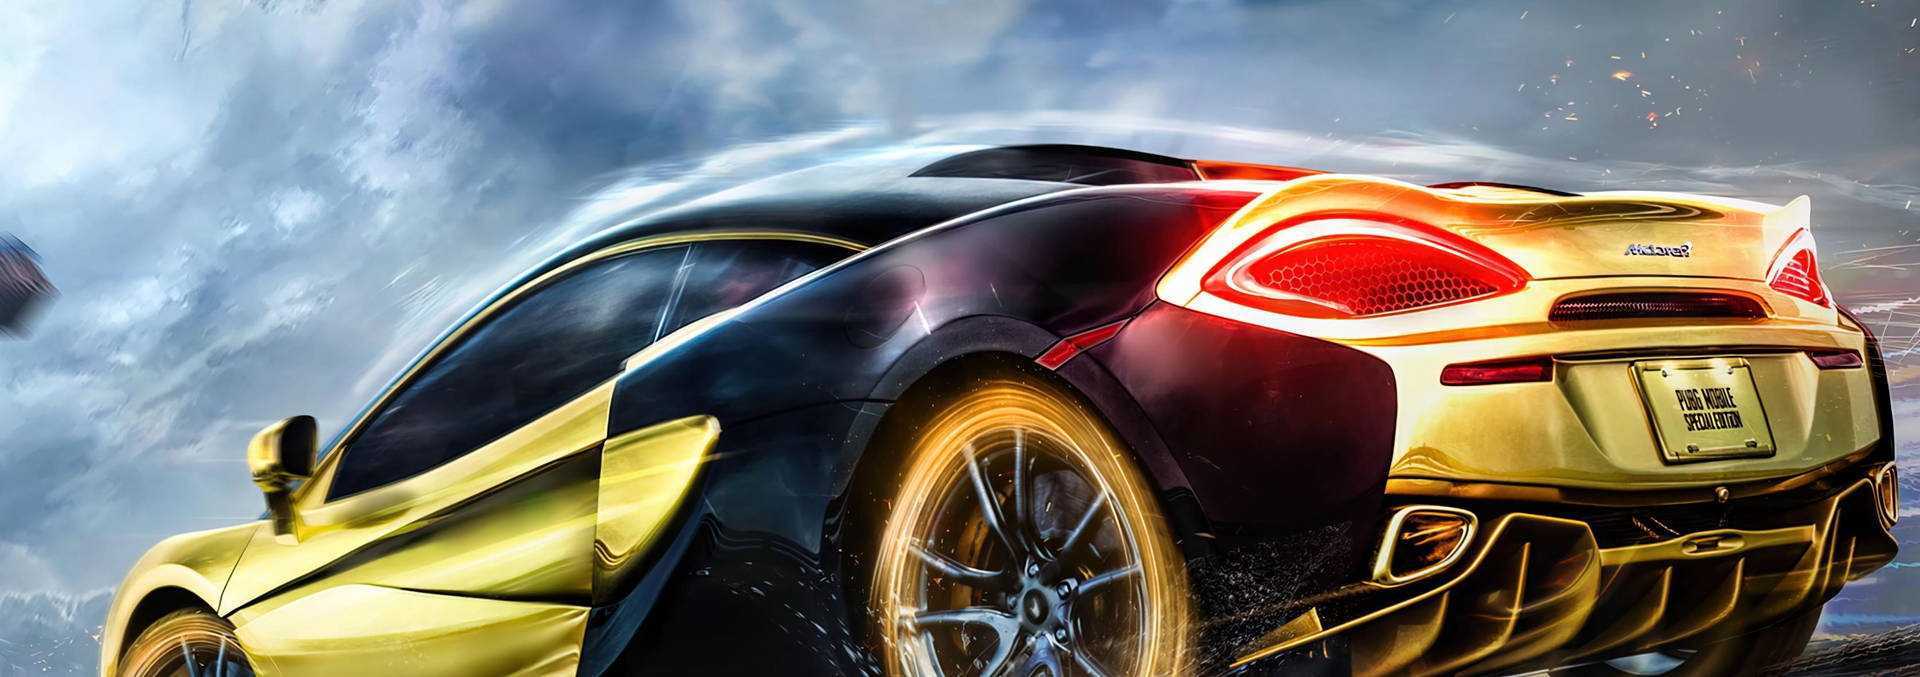 Need For Speed Most Wanted Pc Game Wallpaper